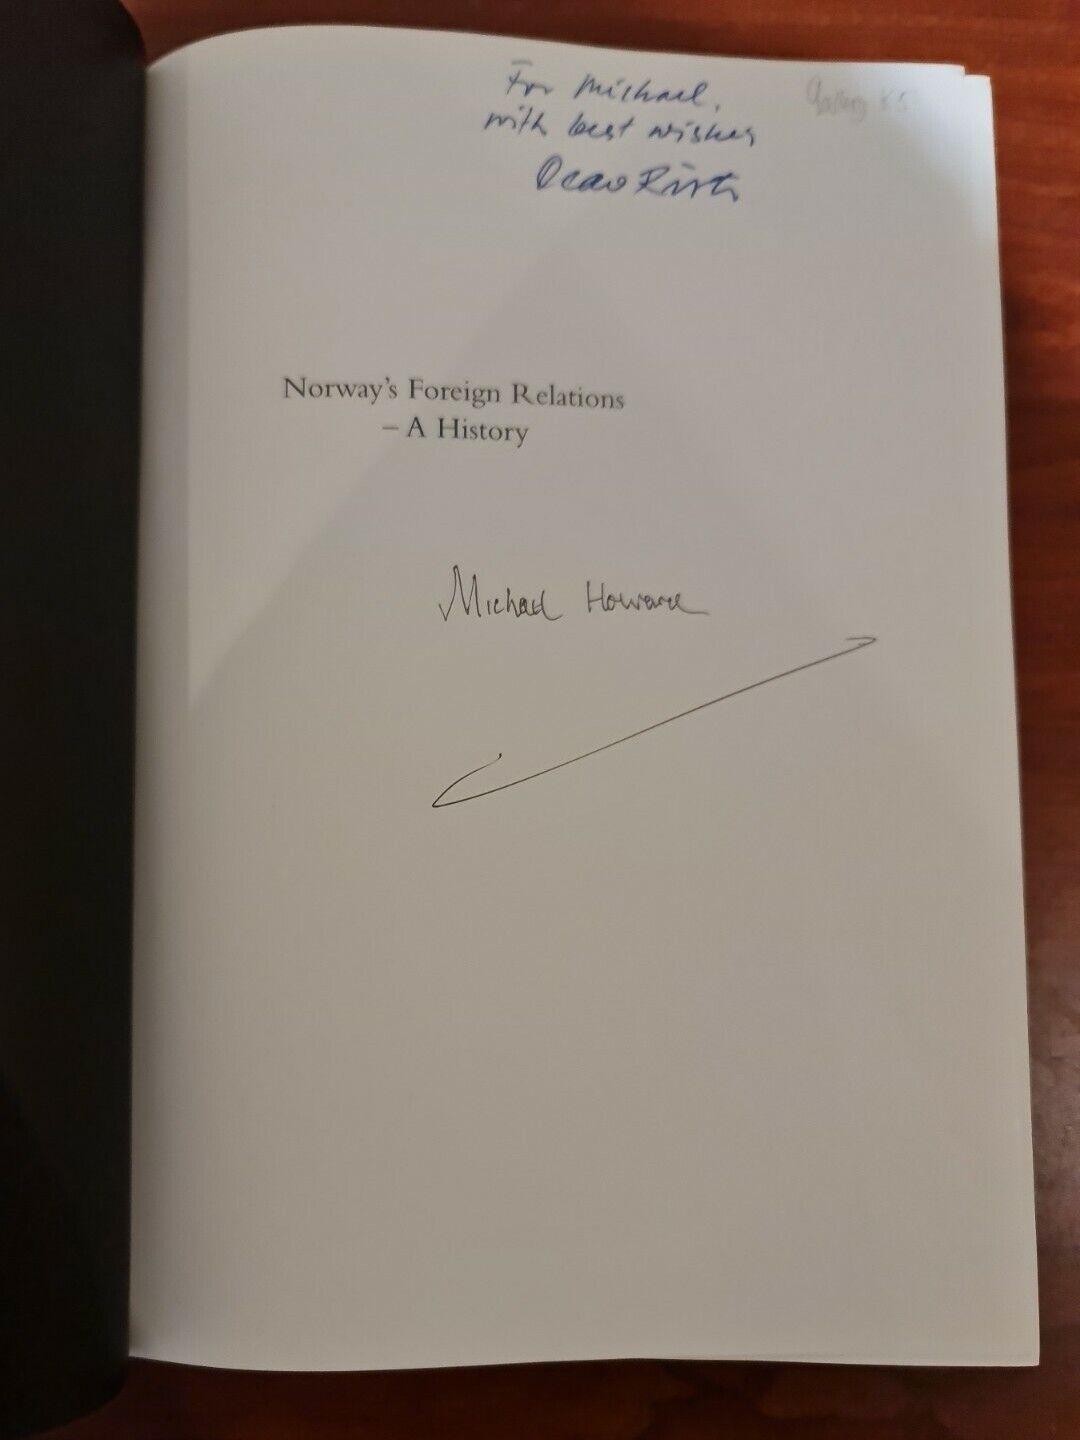 SIGNED - Norway's Foreign Relations: a History by Olav Riste (2001)